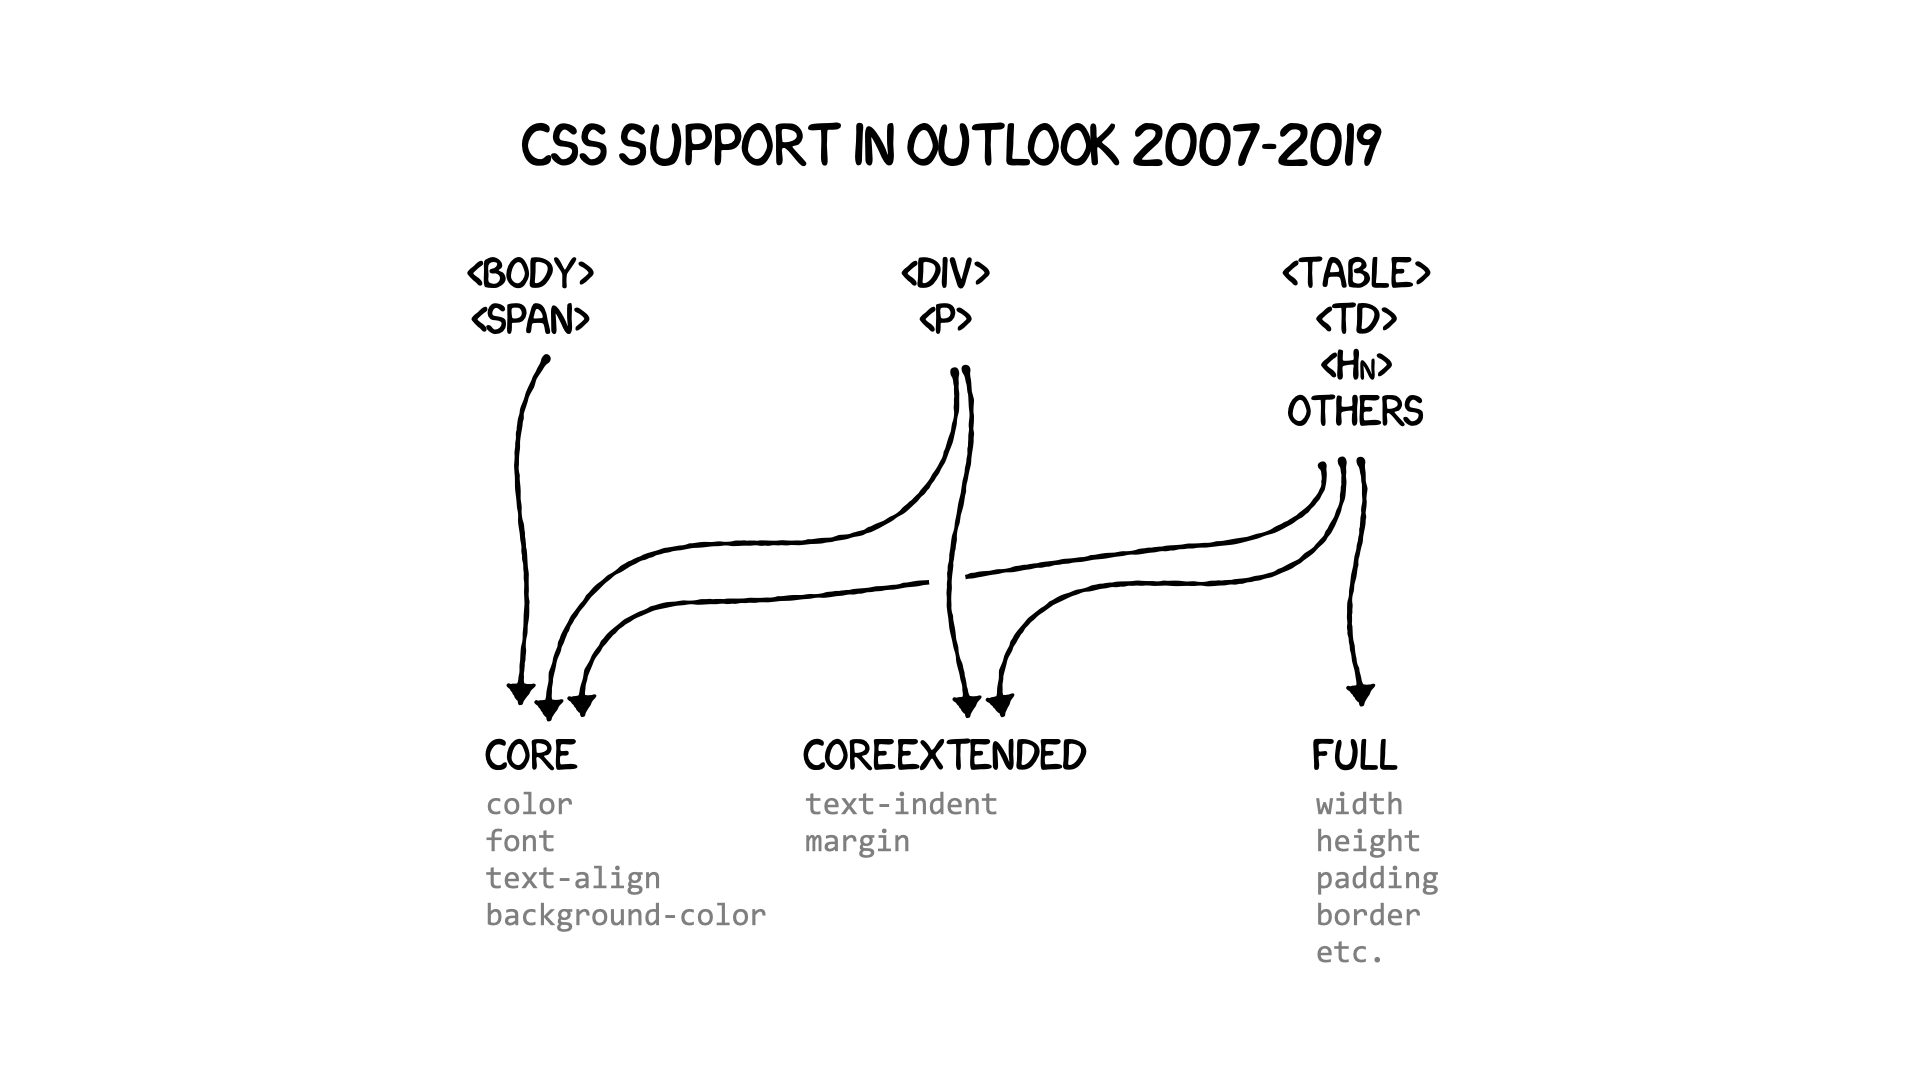 CSS support in Outlook 2007-2019 diagram